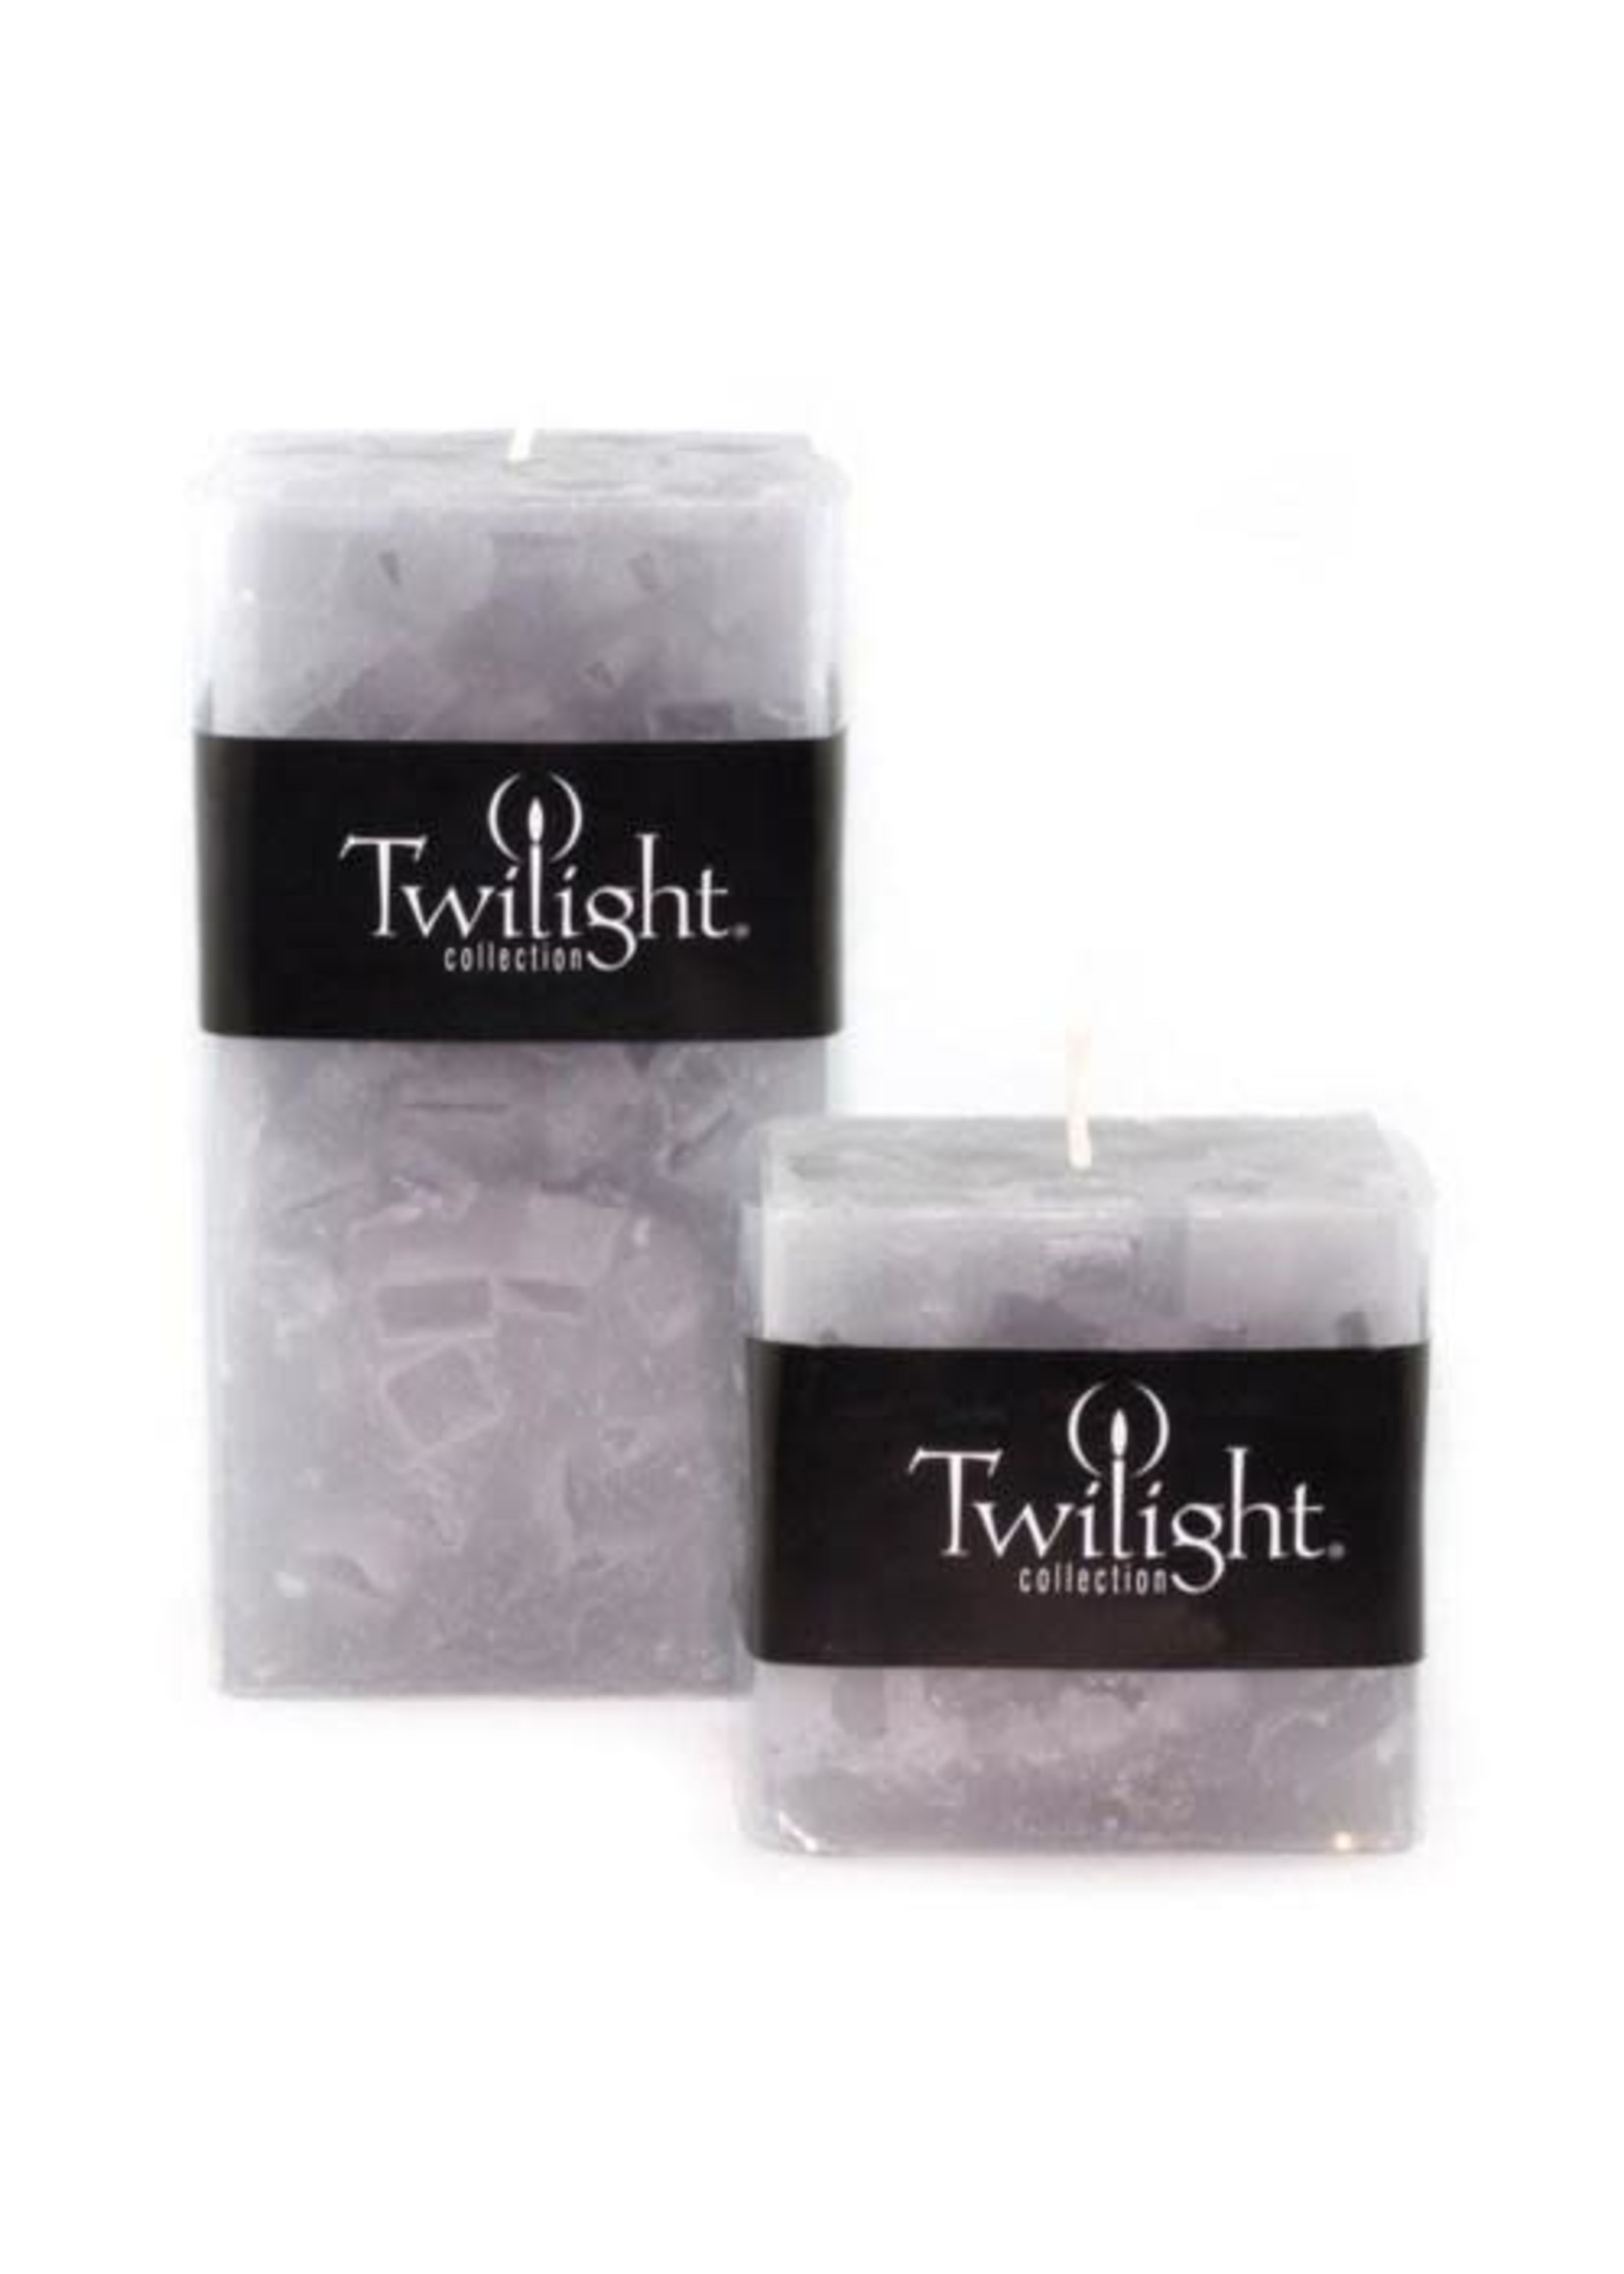 Twilight Real Wax Square Gray Rustic Candle 3"